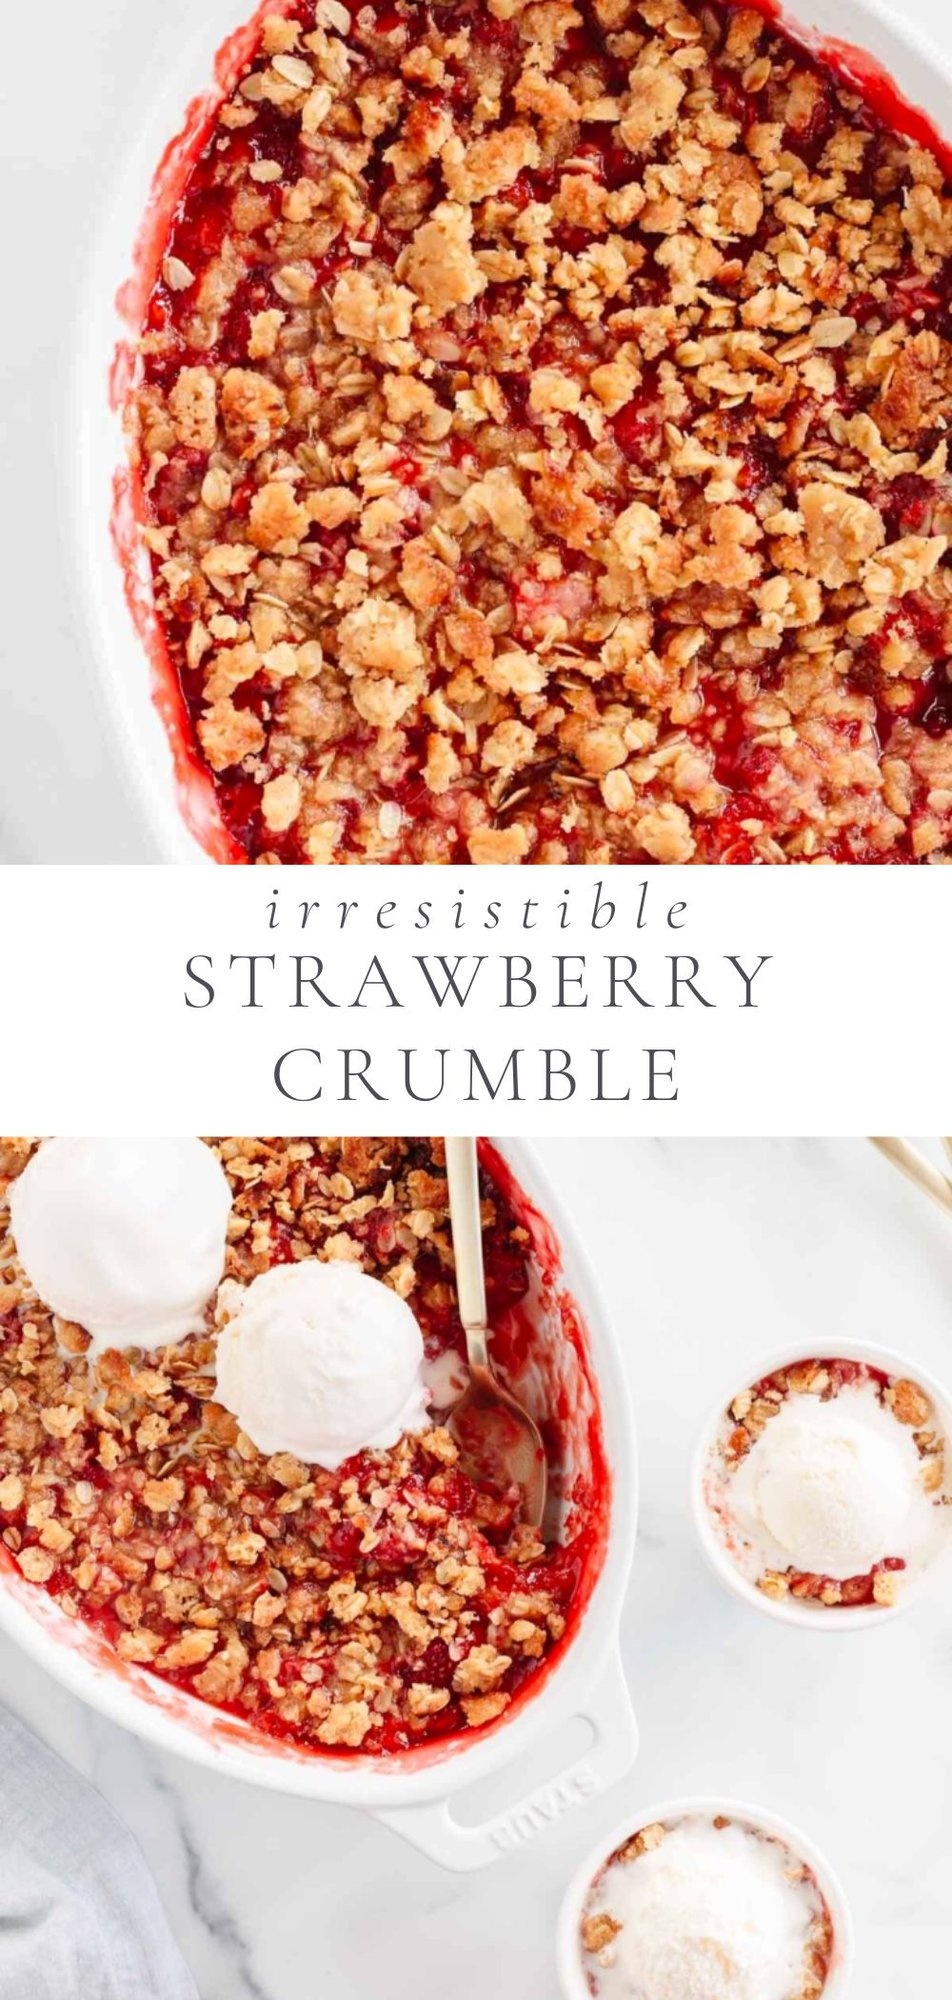 Strawberry Crumble is pictured in a large white baking dish and in two small white one on a marble counter.